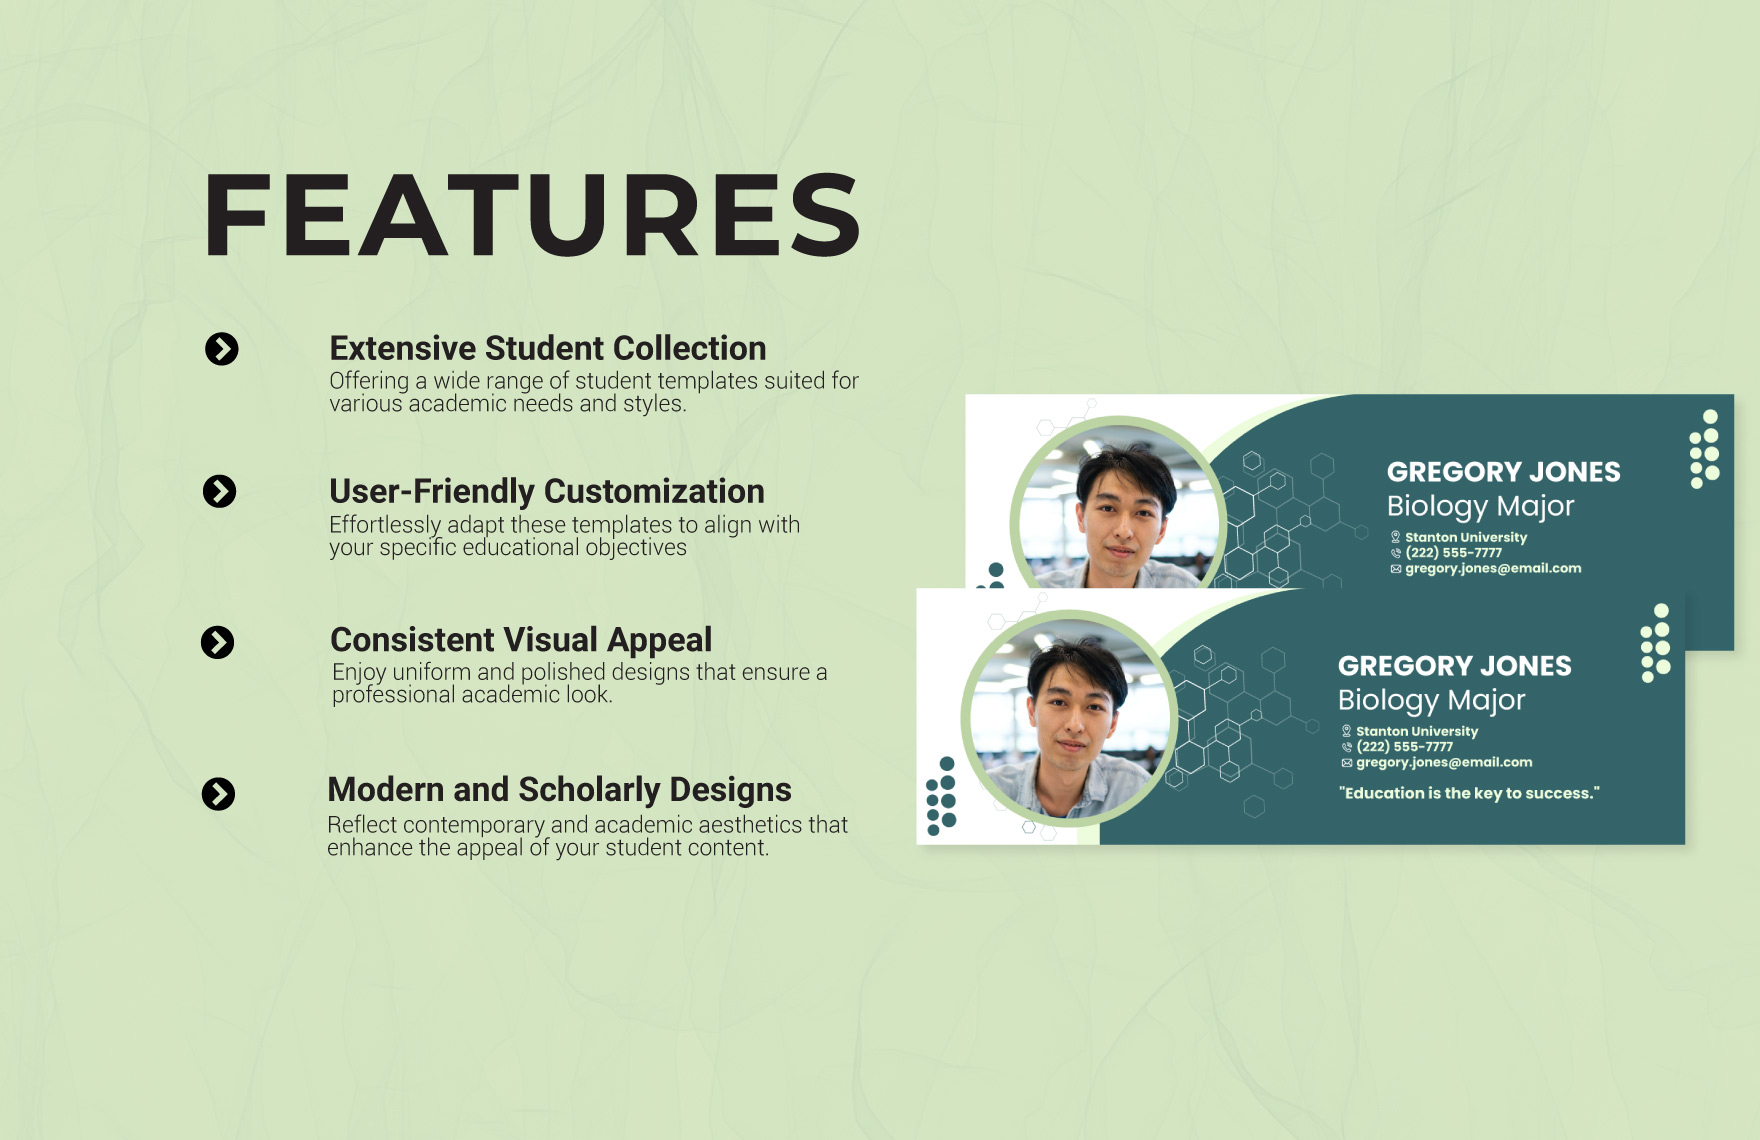 Student Email Signature Template